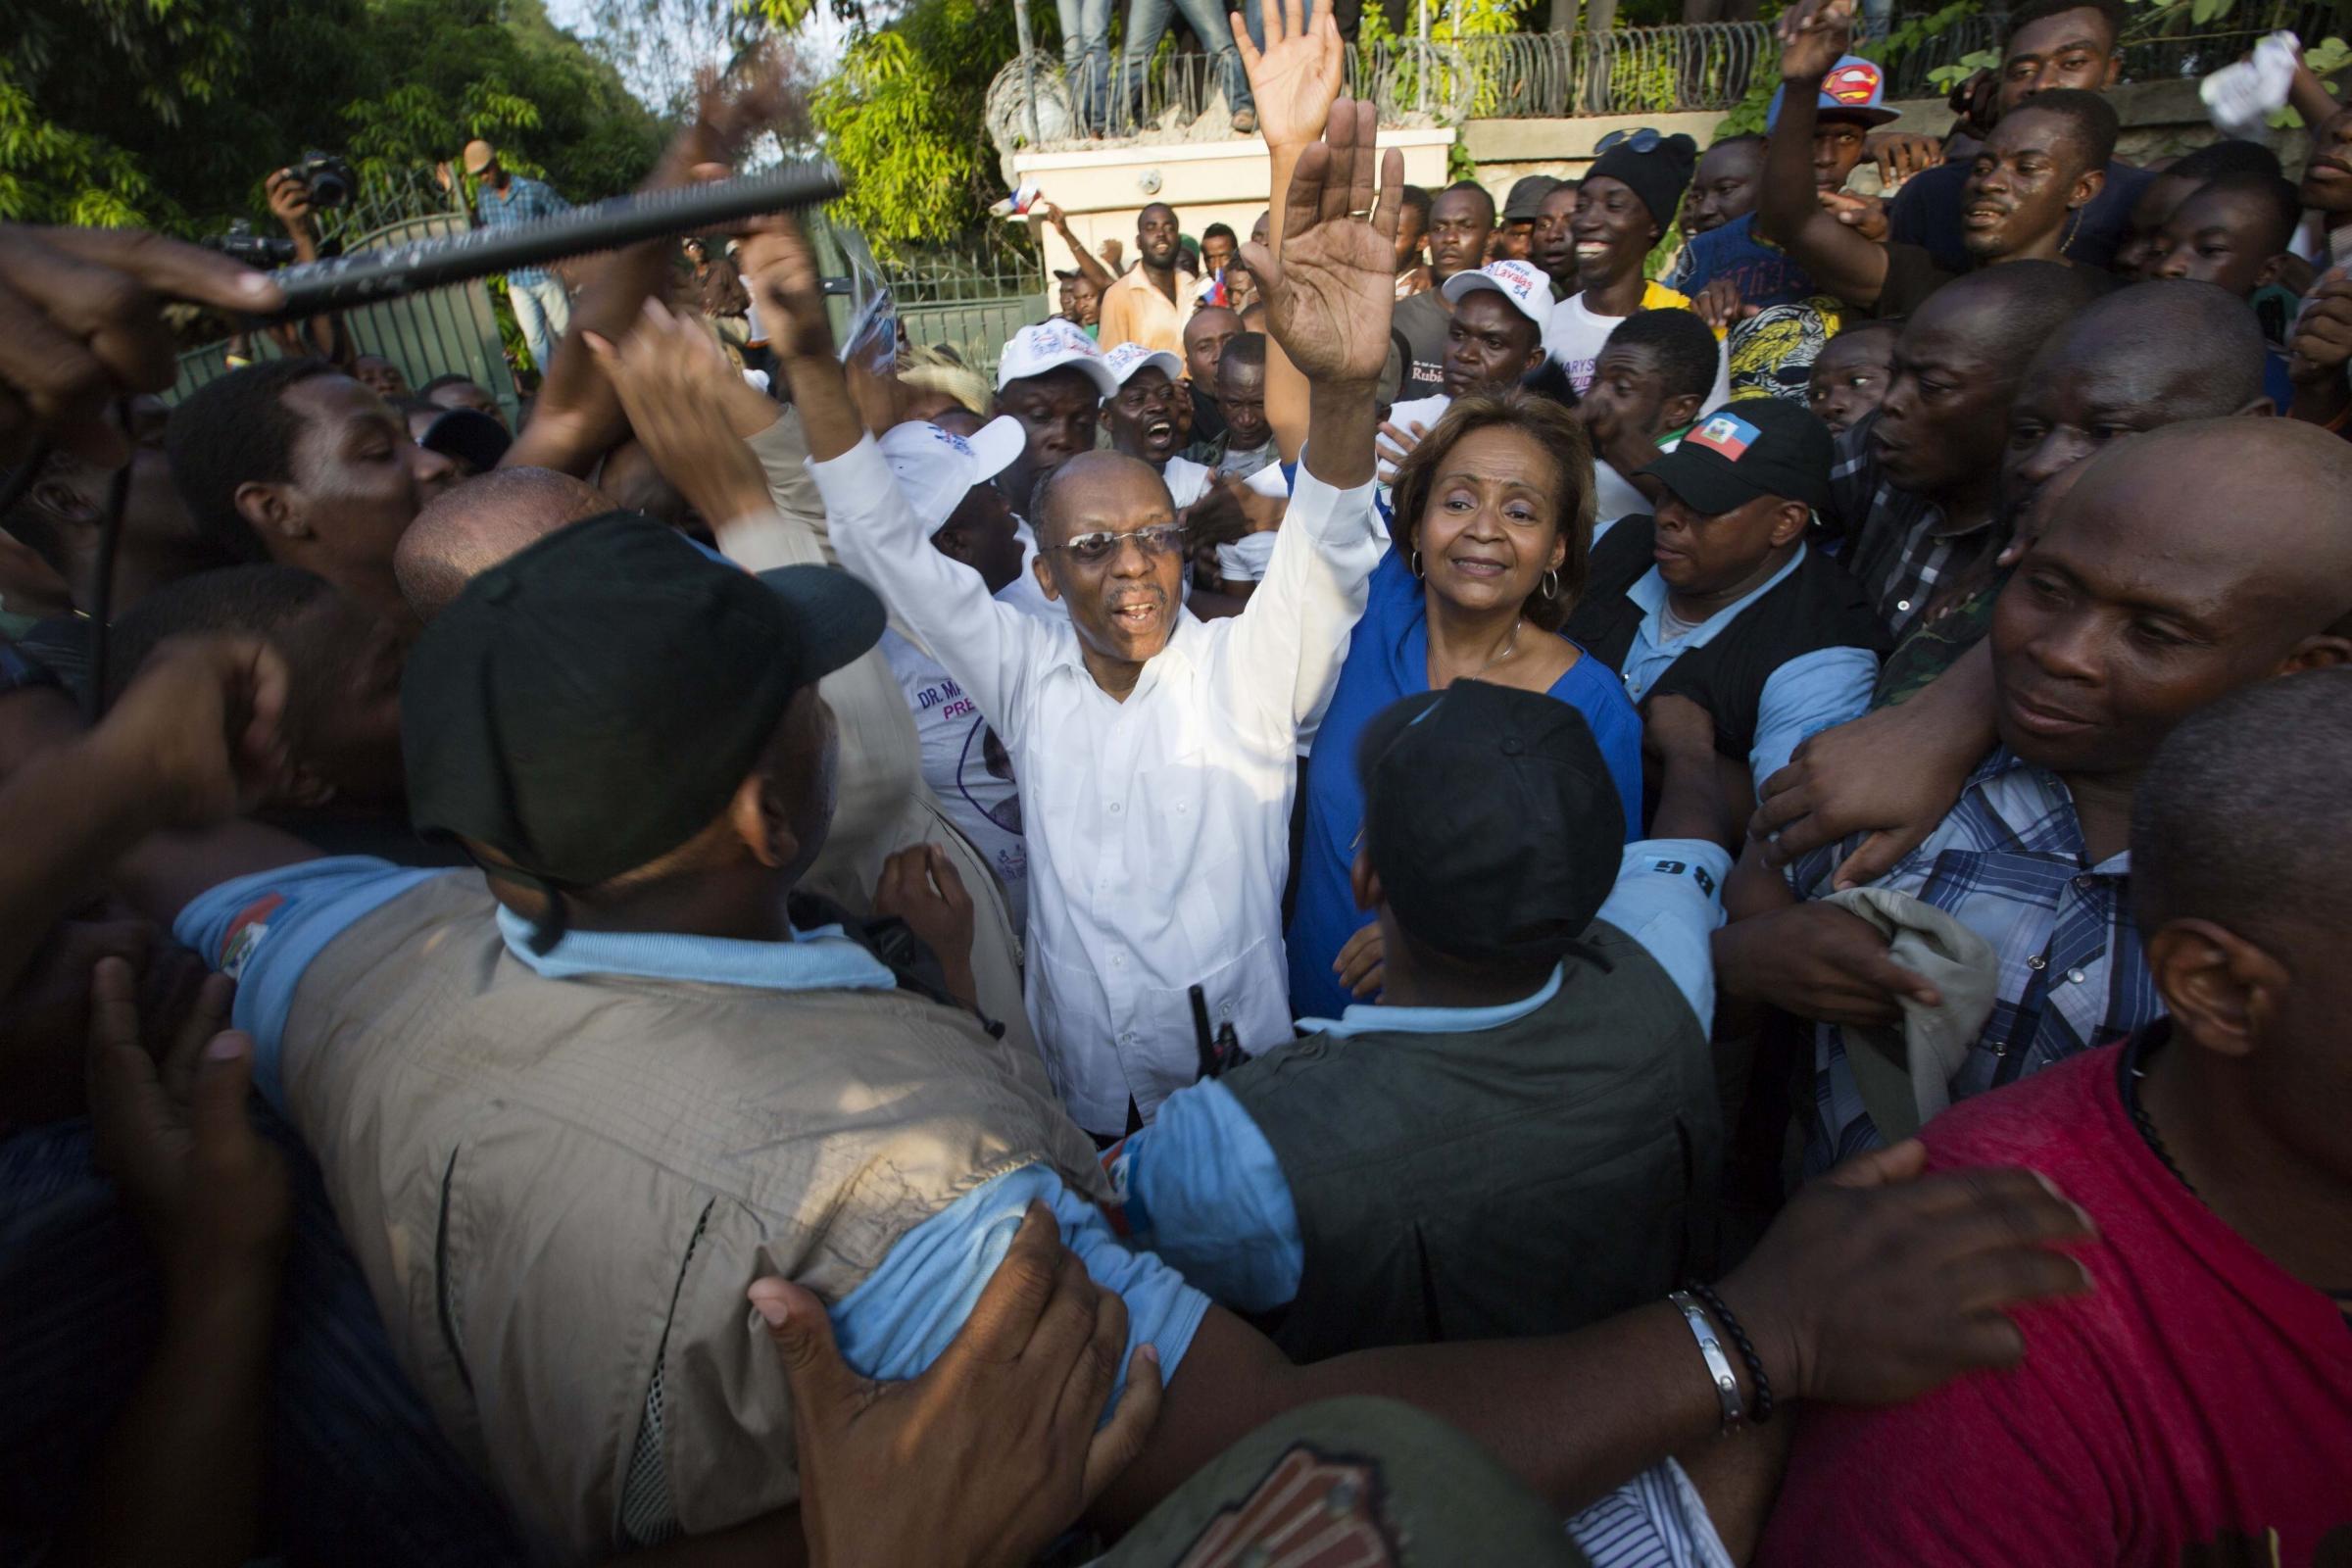 Haitis former President Jean Bertrand Aristide, center, waves to the crowd after he urged supporters to vote for presidential candidate Maryse Narcisse, center right, of the Fanmi Lavalas political party, in Port-au-Prince, Haiti, Wednesday Sept. 30,